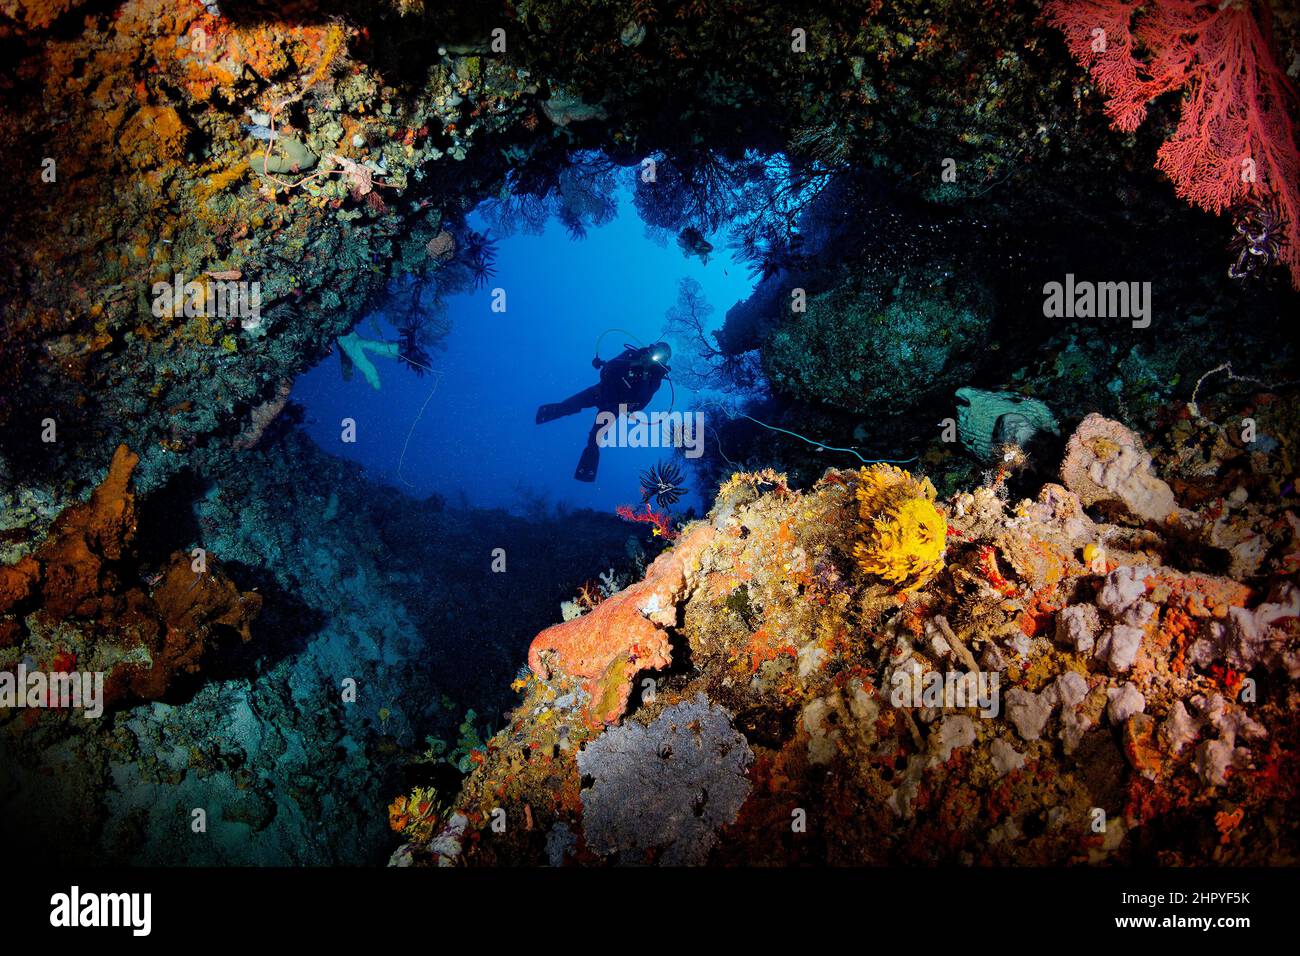 A diver inside famous Galo-galo underwater cave in Morotai Island Stock Photo